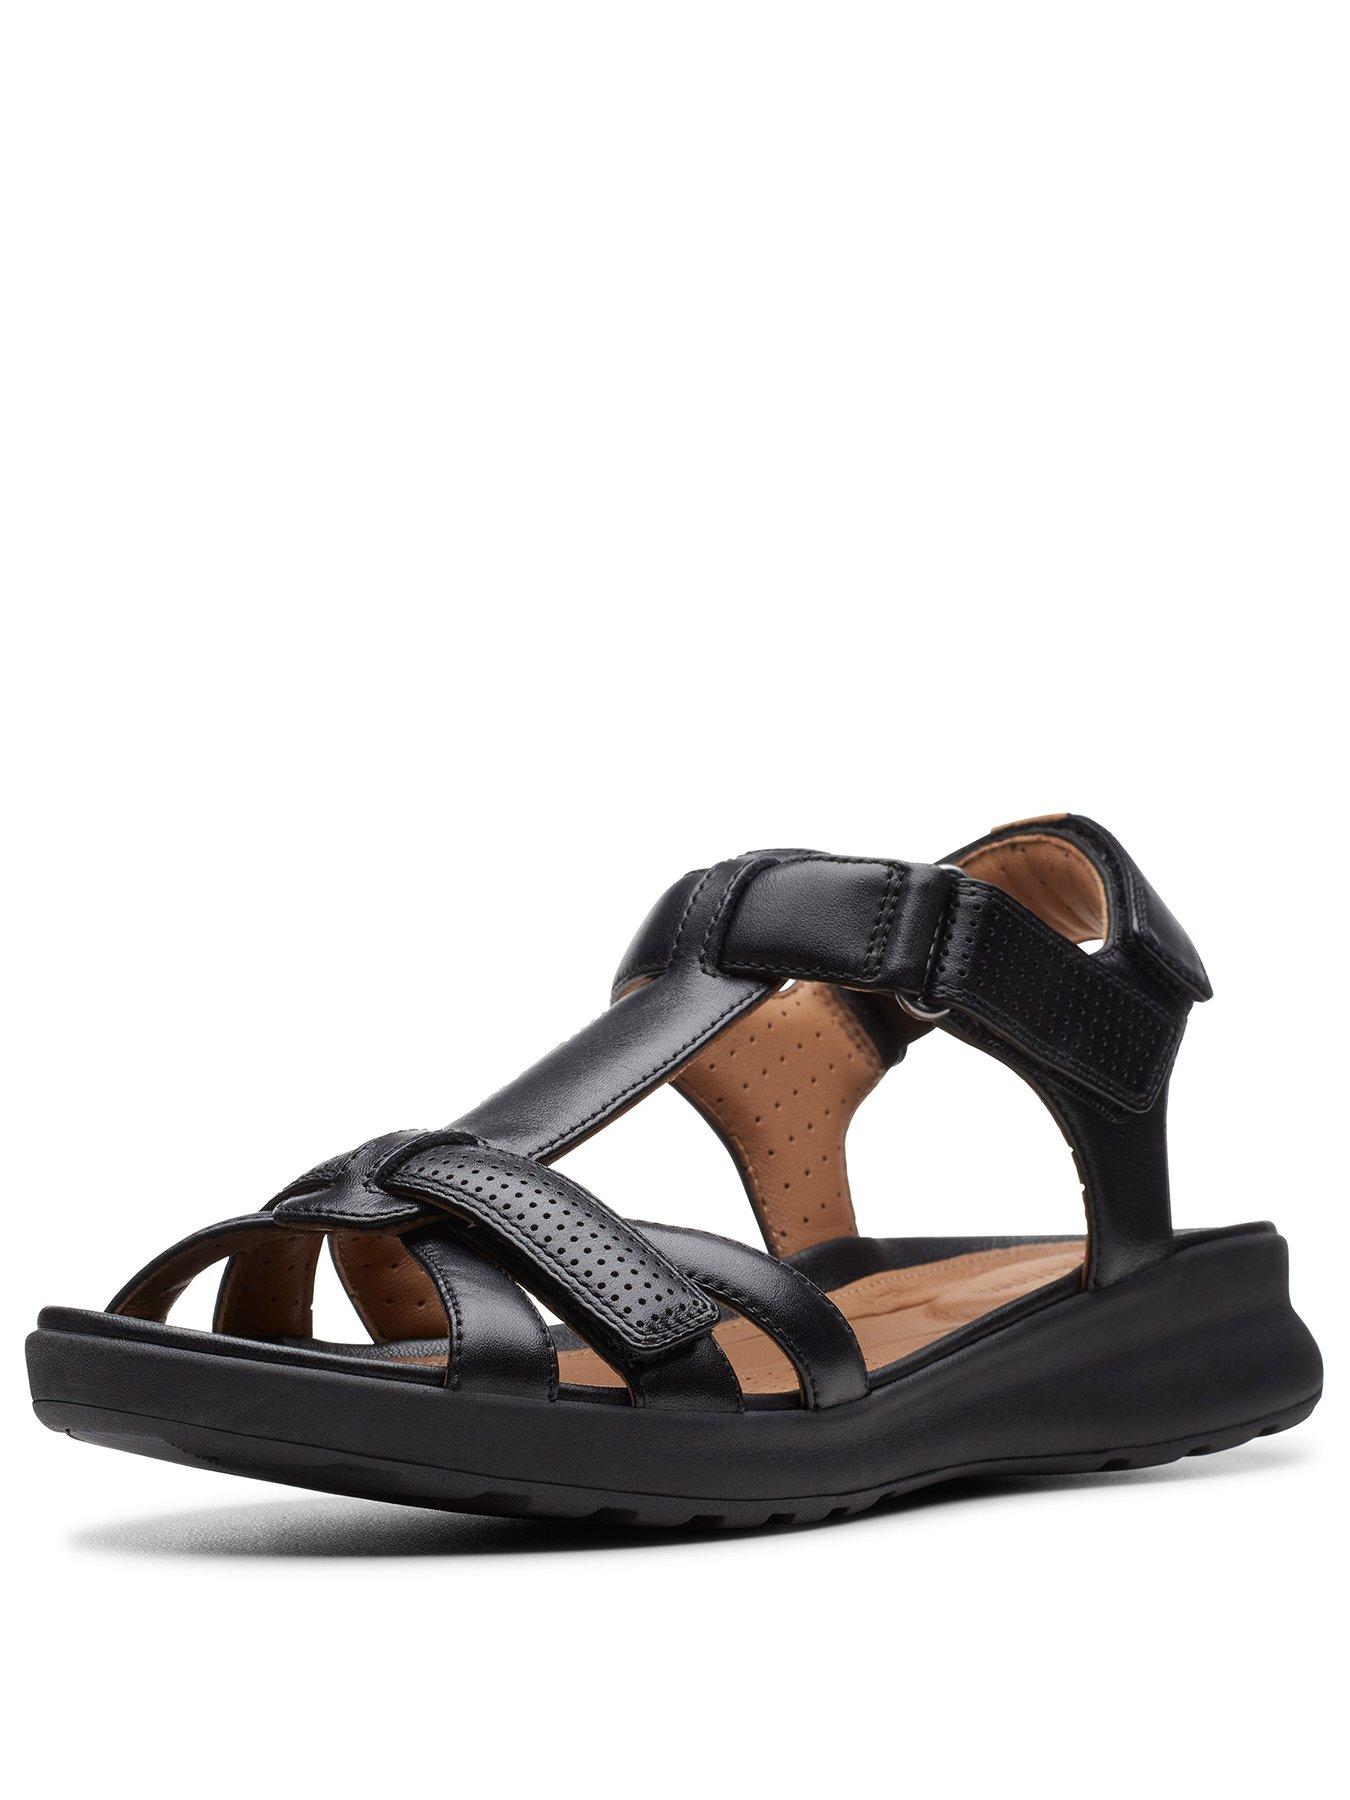 clarks wide fit sandals womens